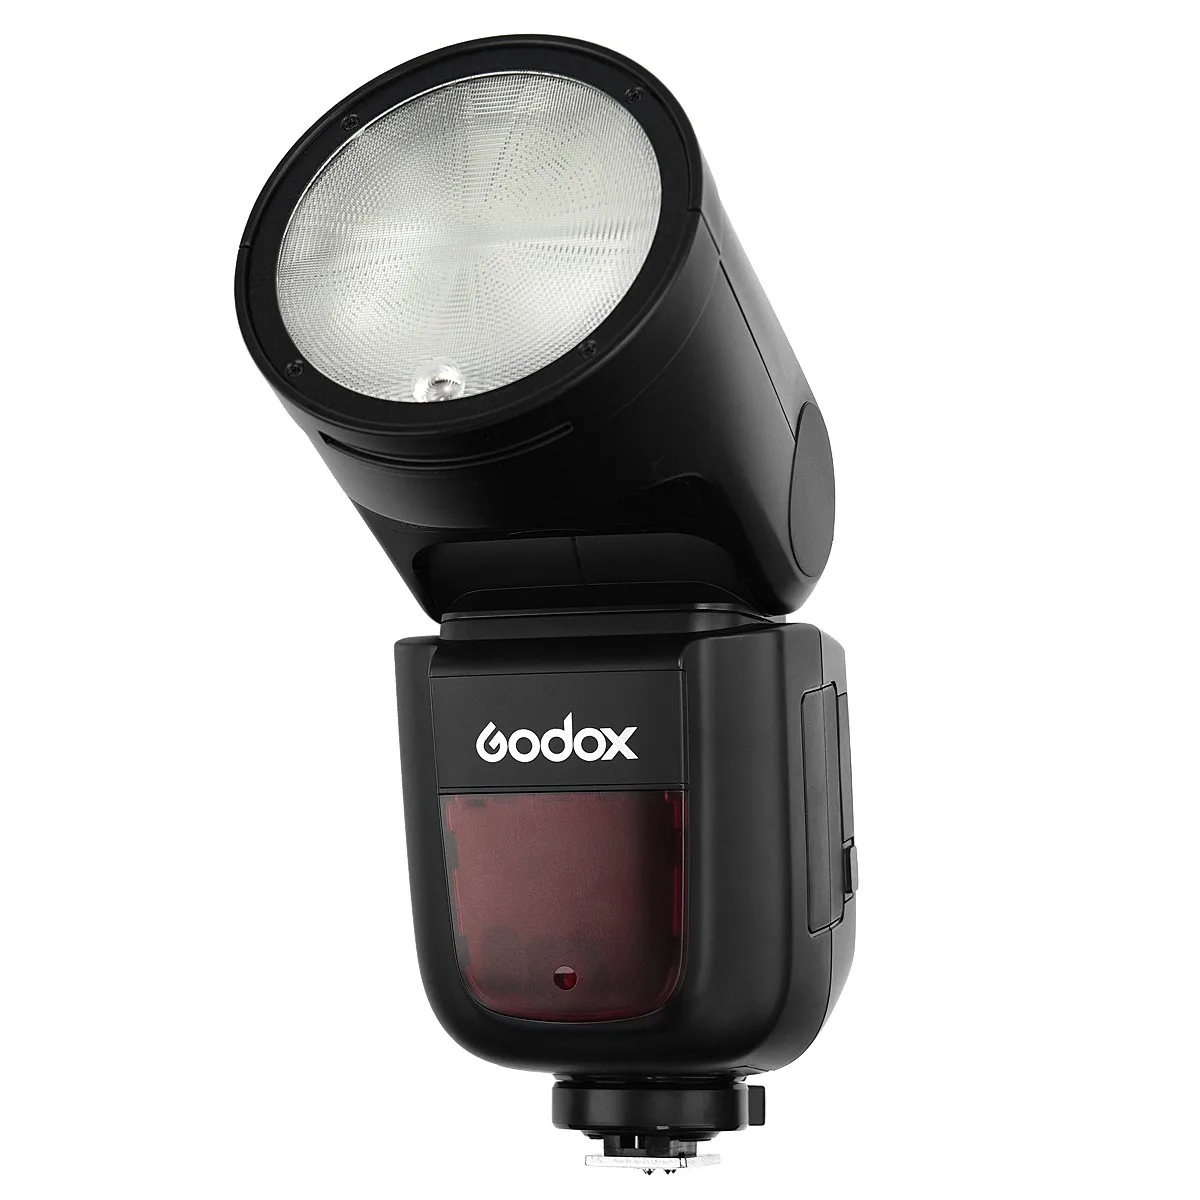  Godox V1-S Flash with Godox XPro-S Accessories Kit for Sony,  Camera Flash Speedlite Speedlight Round Head Compatible with Sony, 76Ws TTL  2.4G 1/8000s HSS, 10 Level LED Modeling Lamp, 1.5s